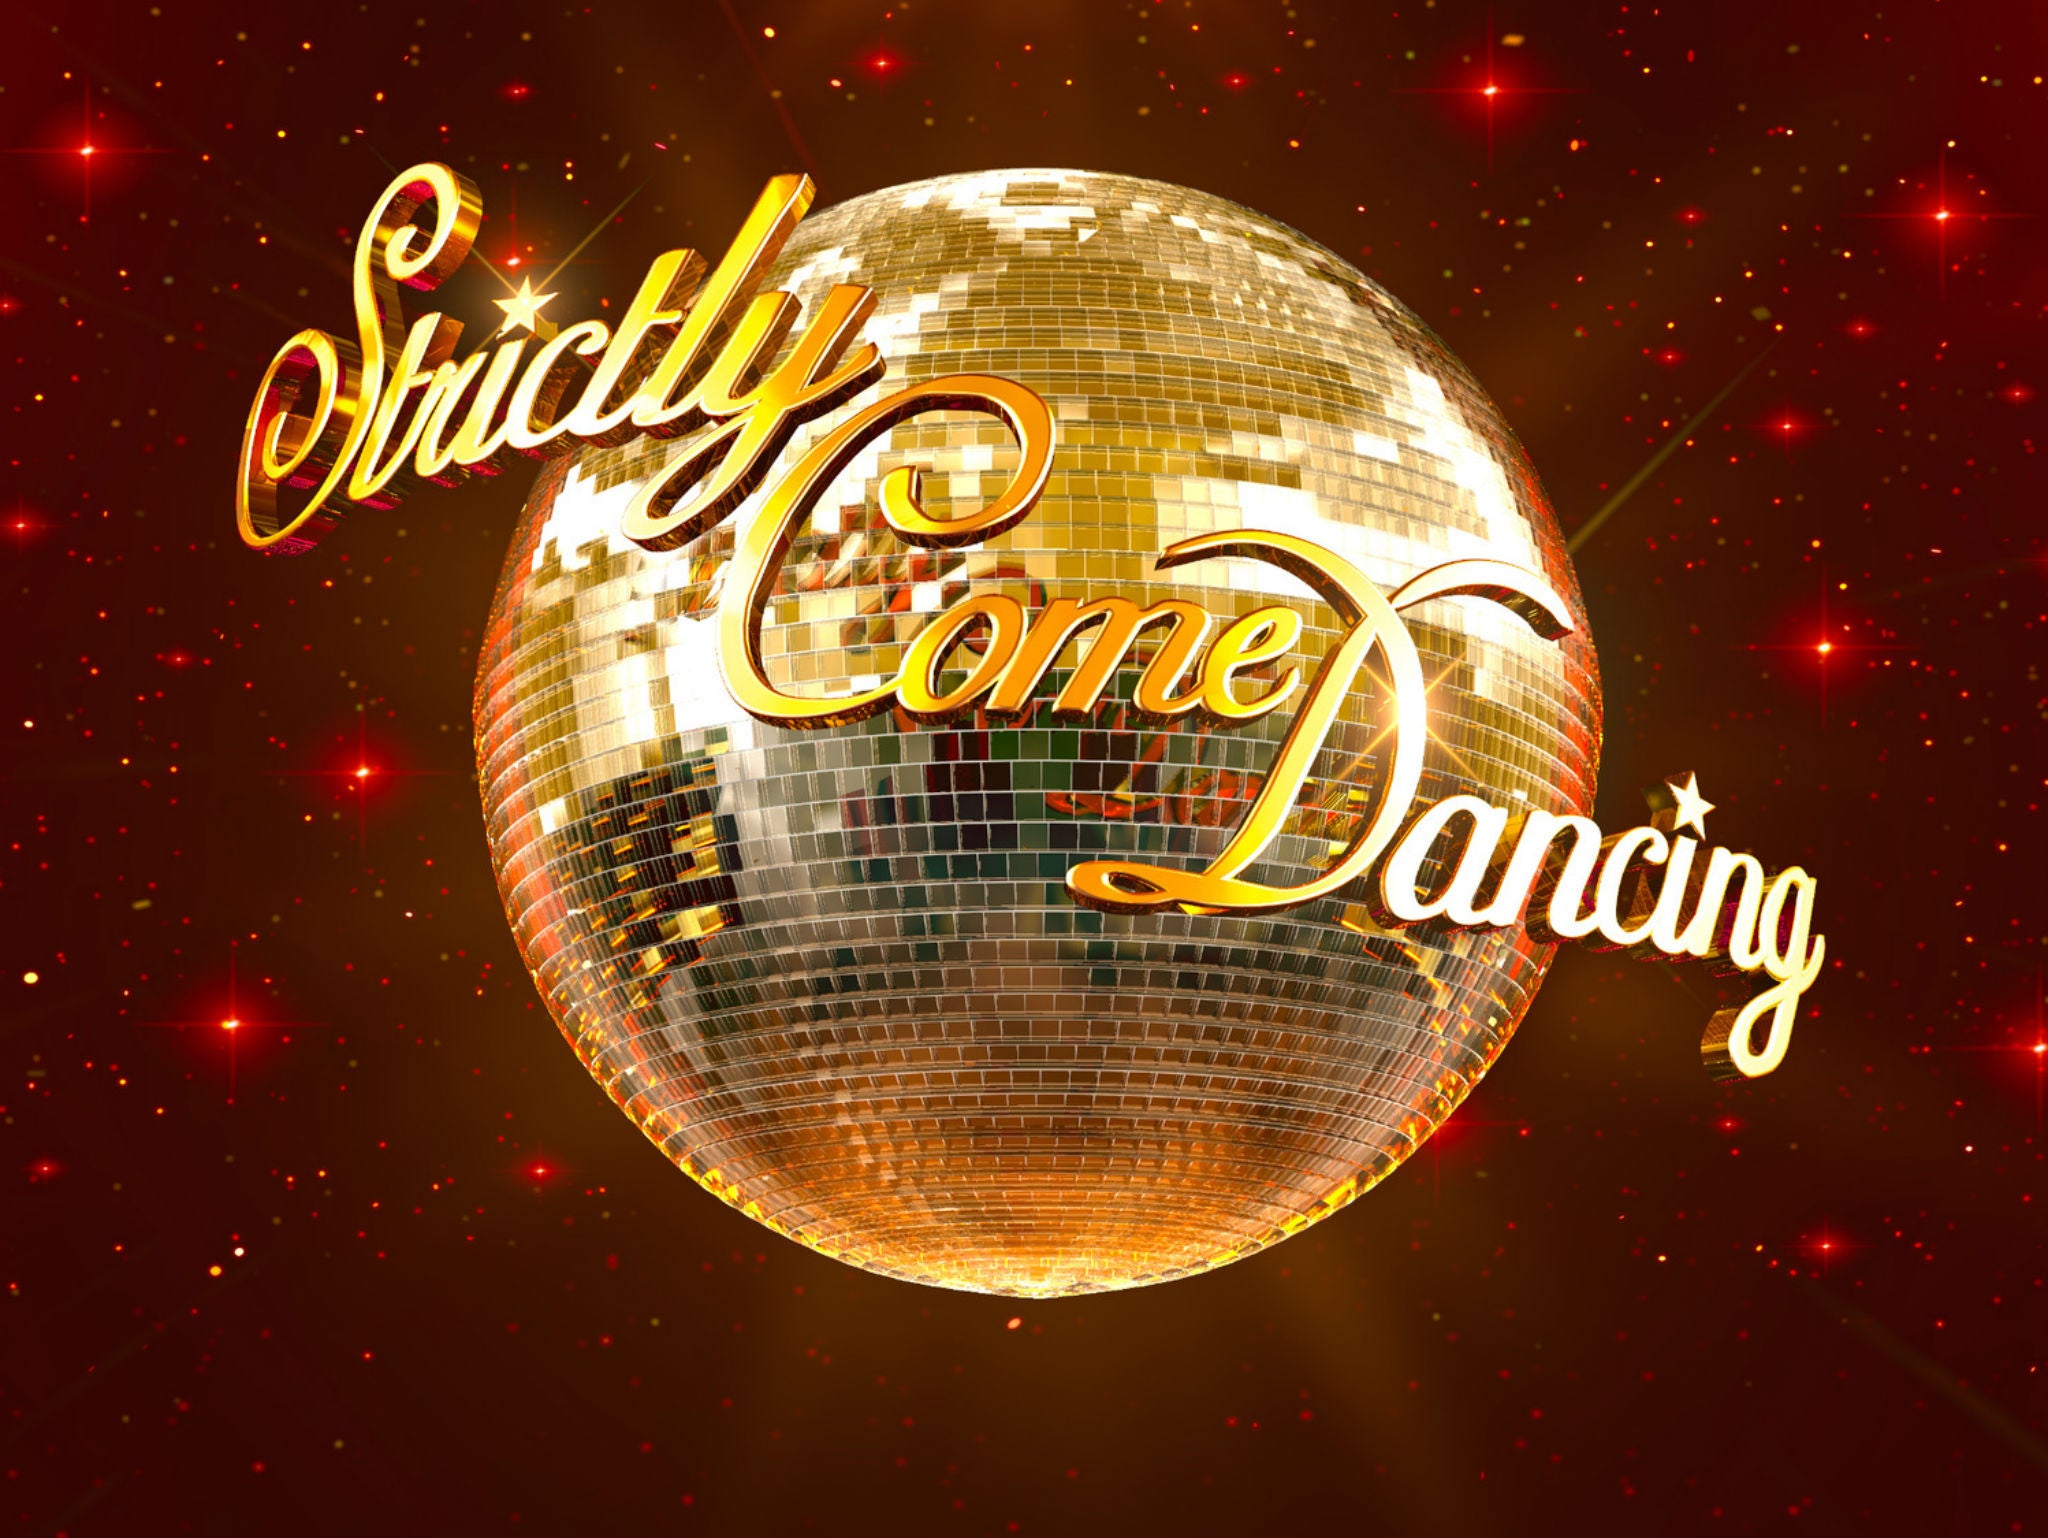 There are reports that due to a potential government edict there'll be no more Strictly Come Dancing versus X Factor on Saturday night